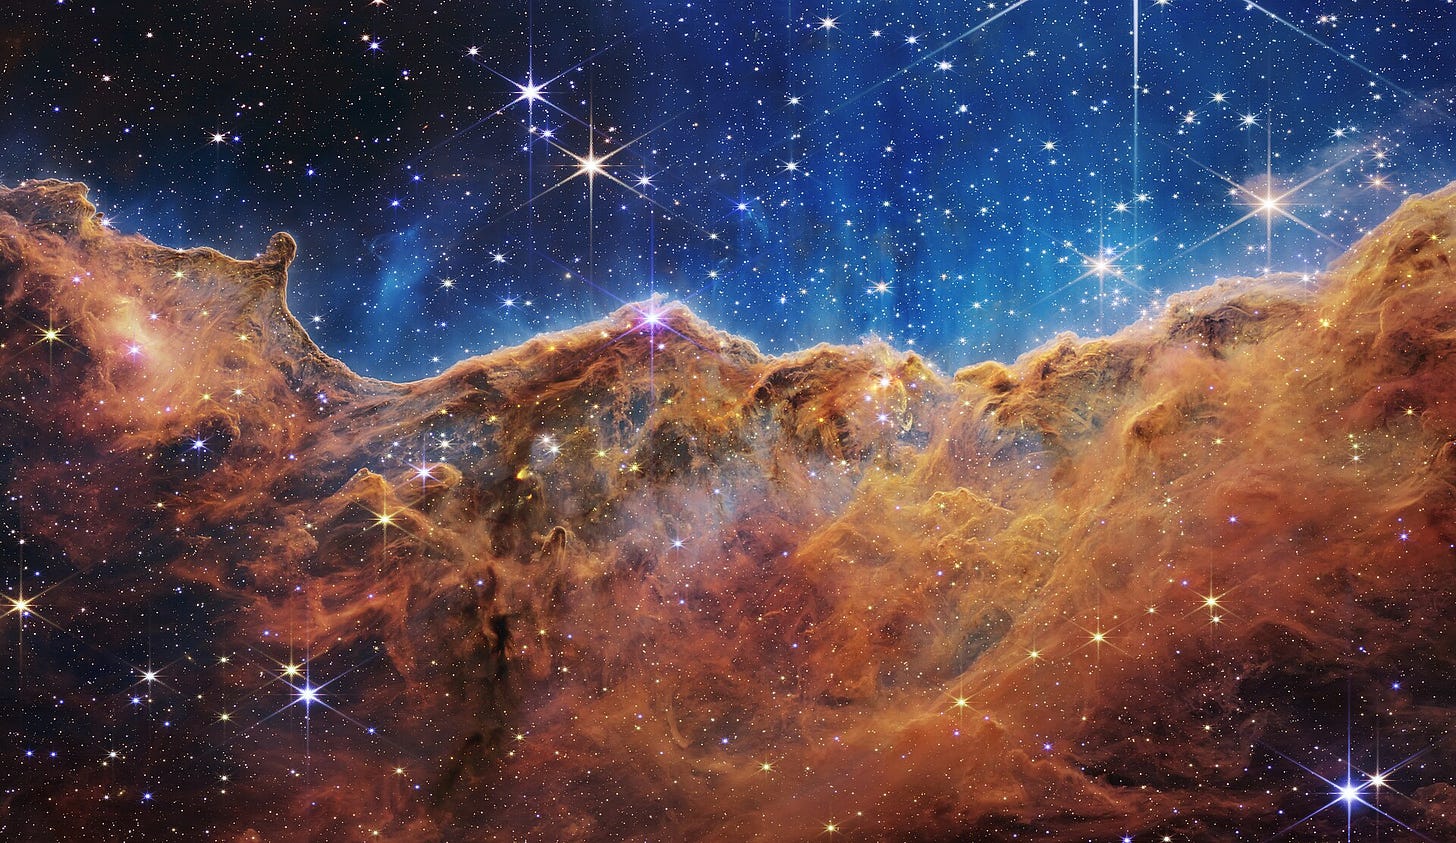 English: What looks much like craggy mountains on a moonlit evening is actually the edge of a nearby, young, star-forming region NGC 3324 in the Carina Nebula. Captured in infrared light by the Near-Infrared Camera (NIRCam) on NASA’s James Webb Space Telescope, this image reveals previously obscured areas of star birth.  Called the Cosmic Cliffs, the region is actually the edge of a gigantic, gaseous cavity within NGC 3324, roughly 7,600 light-years away. The cavernous area has been carved from the nebula by the intense ultraviolet radiation and stellar winds from extremely massive, hot, young stars located in the center of the bubble, above the area shown in this image. The high-energy radiation from these stars is sculpting the nebula’s wall by slowly eroding it away.  NIRCam – with its crisp resolution and unparalleled sensitivity – unveils hundreds of previously hidden stars, and even numerous background galaxies. Several prominent features in this image are described below.  -- The “steam” that appears to rise from the celestial “mountains” is actually hot, ionized gas and hot dust streaming away from the nebula due to intense, ultraviolet radiation.  -- Dramatic pillars rise above the glowing wall of gas, resisting the blistering ultraviolet radiation from the young stars.  -- Bubbles and cavities are being blown by the intense radiation and stellar winds of newborn stars.  -- Protostellar jets and outflows, which appear in gold, shoot from dust-enshrouded, nascent stars.  -- A “blow-out” erupts at the top-center of the ridge, spewing gas and dust into the interstellar medium.  -- An unusual “arch” appears, looking like a bent-over cylinder.  This period of very early star formation is difficult to capture because, for an individual star, it lasts only about 50,000 to 100,000 years – but Webb’s extreme sensitivity and exquisite spatial resolution have chronicled this rare event.  Located roughly 7,600 light-years away, NGC 3324 was first catalogued by James Dunlop in 1826. Visible from the Southern Hemisphere, it is located at the northwest corner of the Carina Nebula (NGC 3372), which resides in the constellation Carina. The Carina Nebula is home to the Keyhole Nebula and the active, unstable supergiant star called Eta Carinae. 